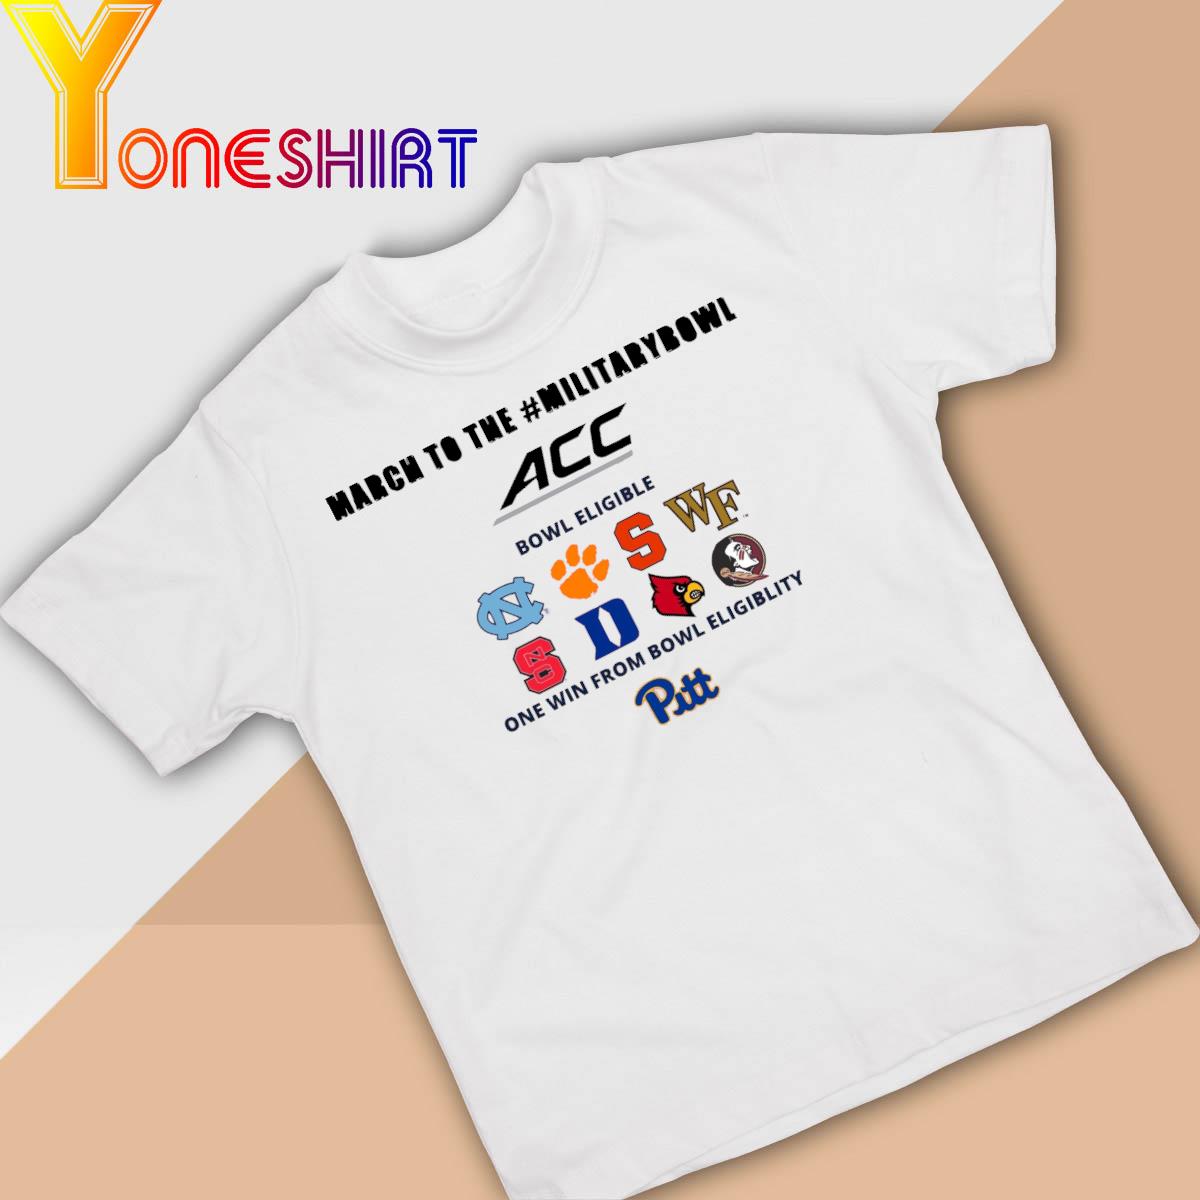 March to the Military Bowl ACC One win from Bowl Eligibility Pitts shirt